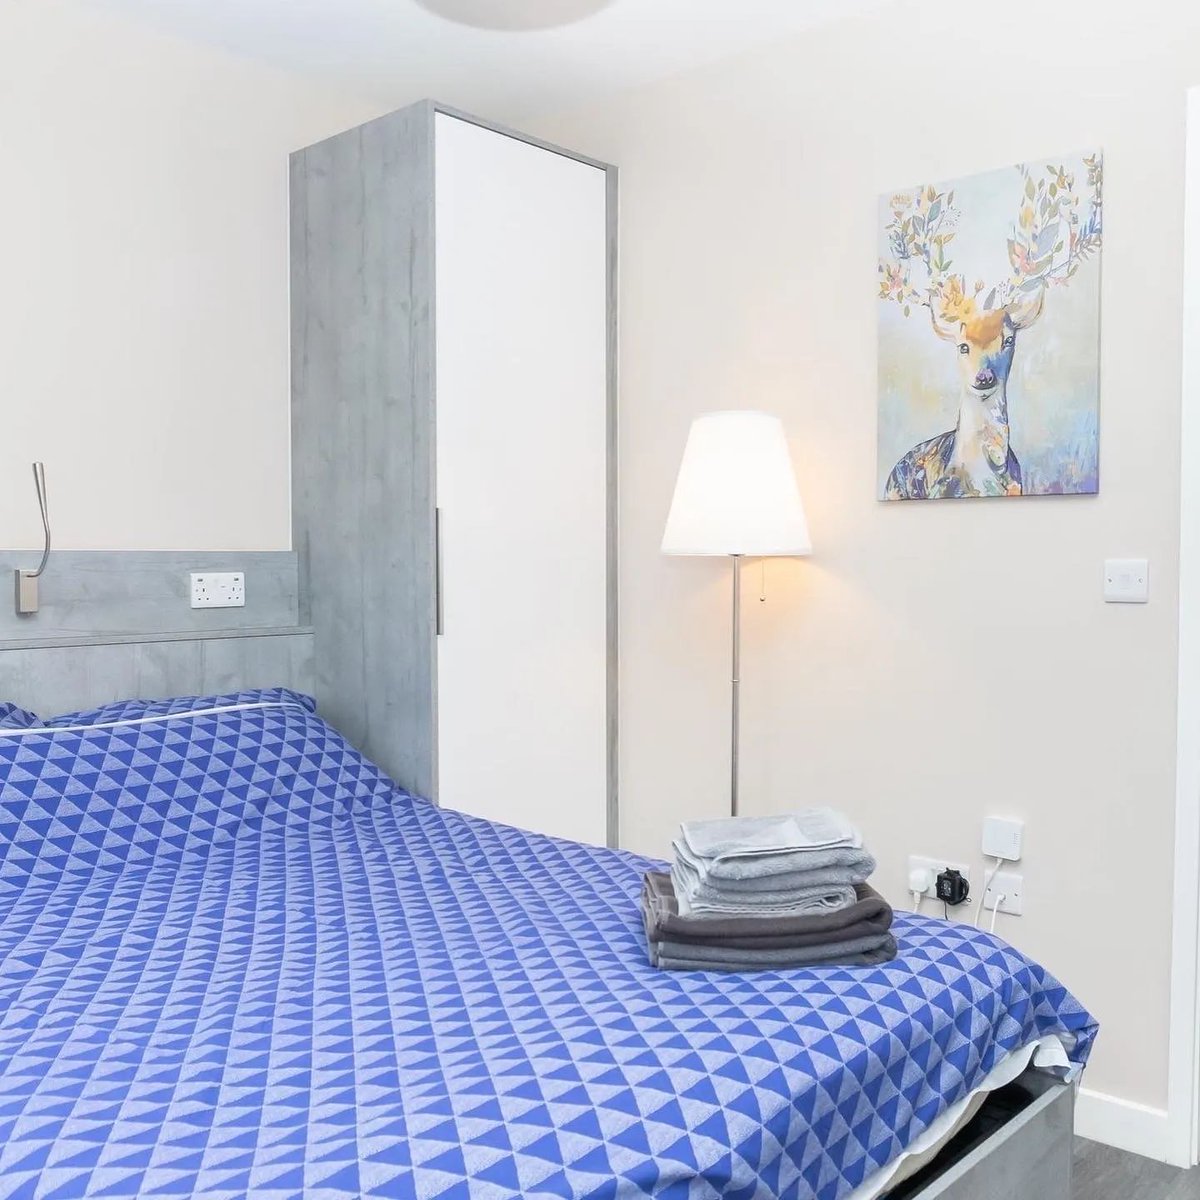 Get the best of all worlds with #StayLets! Comfort, value for money and flexibility all in one place 🧡 Perfect for leisure or work stays. Visit our website to book now! buff.ly/2VMnM79 #ServicedAccommodation #AffordableSccommodation #Surrey #Cheltenham